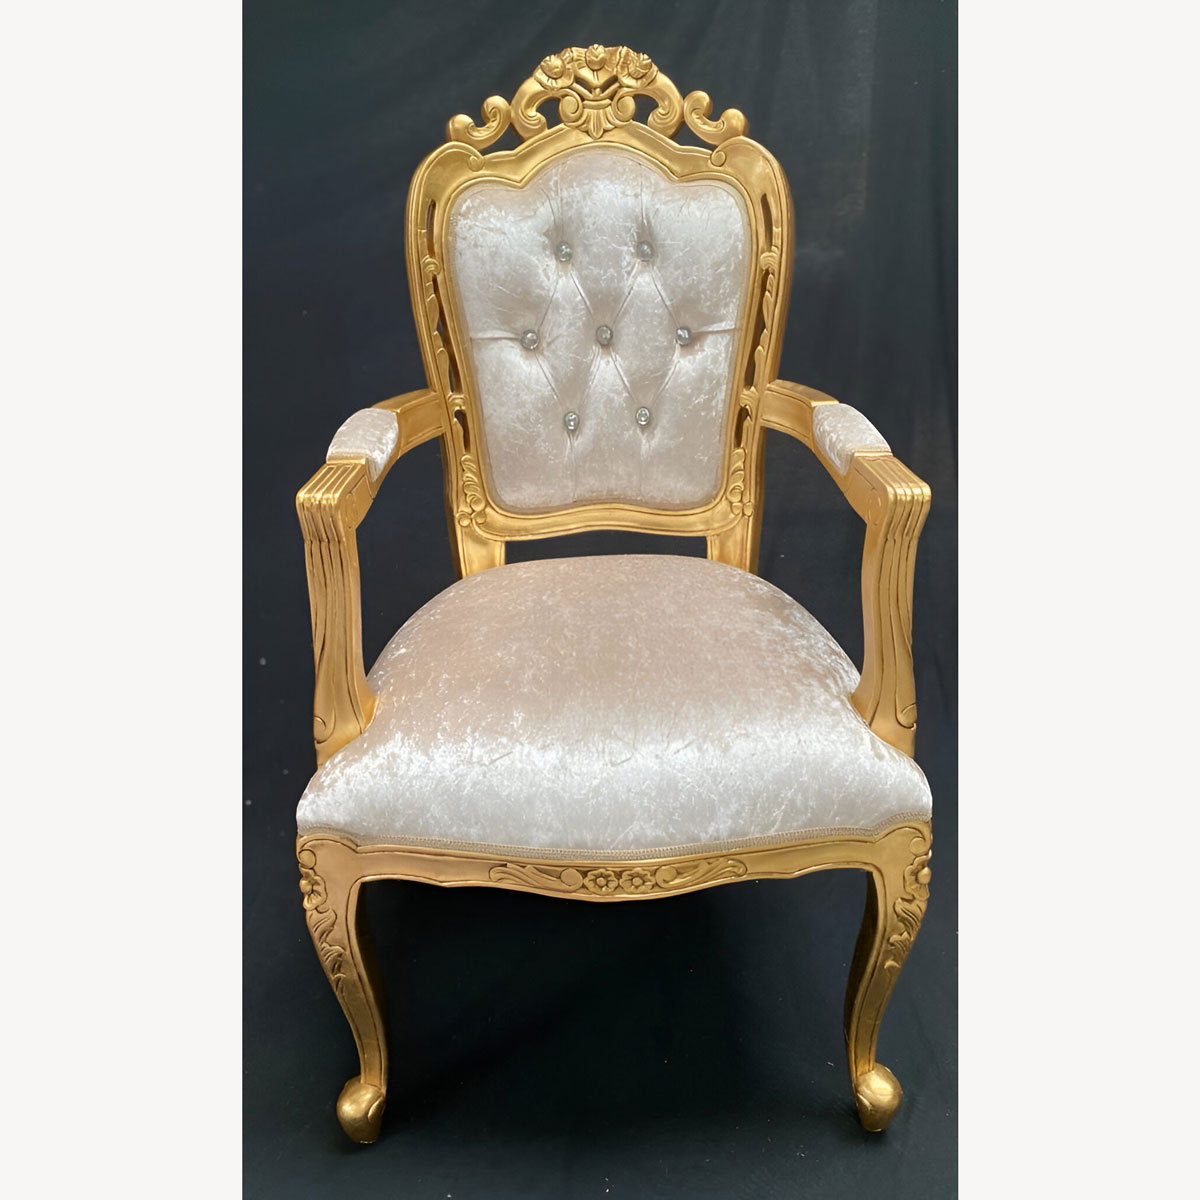 Franciscan Wedding Or Dining Chair With Arms Gold Leaf With Ivory Cream Crushed Velvet Fabric With Crystal Buttons 1 - Hampshire Barn Interiors - Franciscan Wedding Or Dining Chair With Arms Gold Leaf With Ivory Cream Crushed Velvet Fabric With Crystal Buttons -